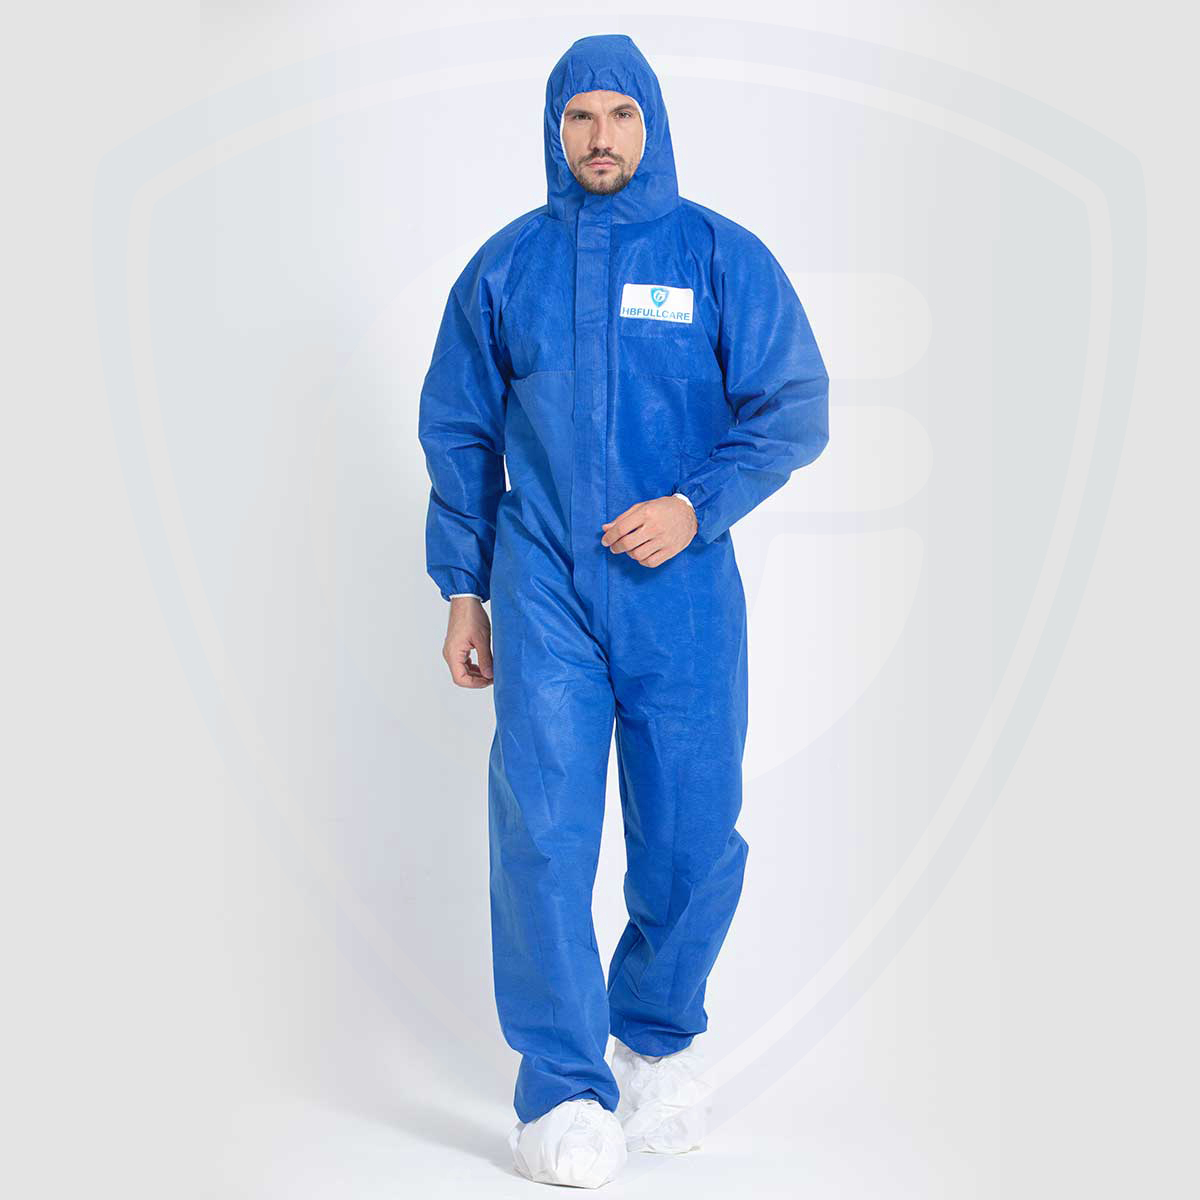 Durable Disposable Fire Retardant Coverall Protection Against Radioactive Particulate Contamination